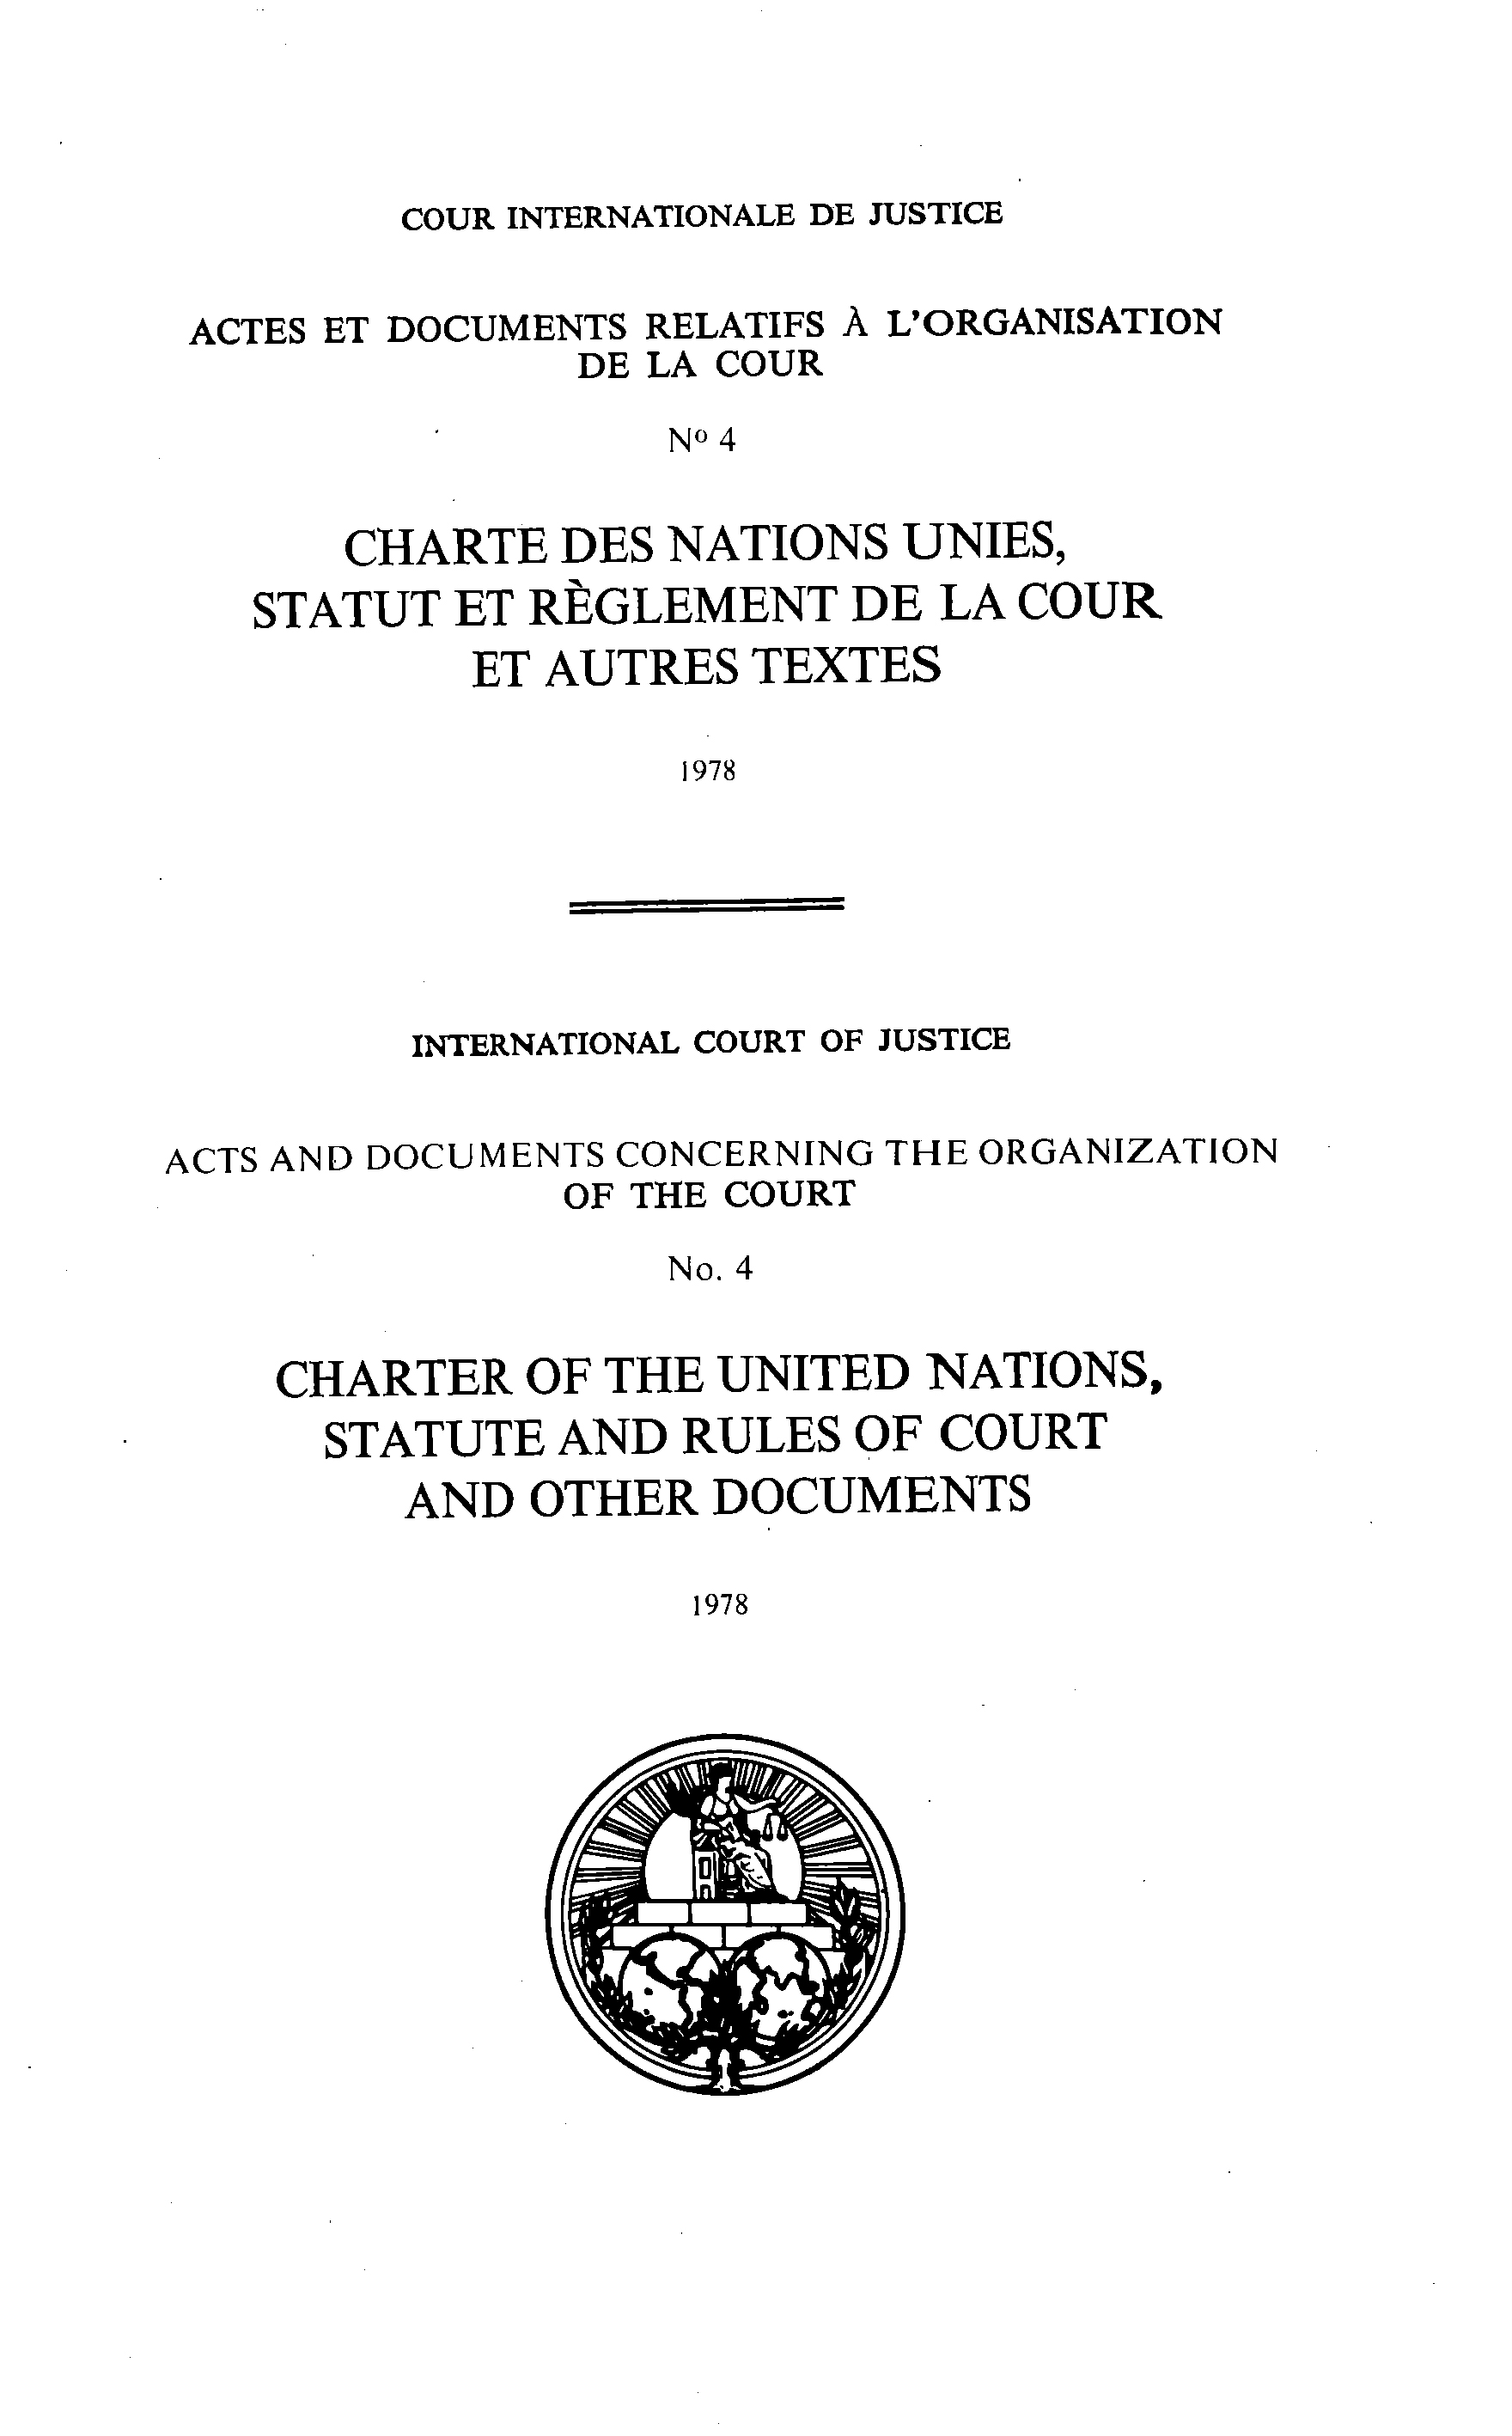 image of Acts and Documents Concerning the Organization of the Court No. 4